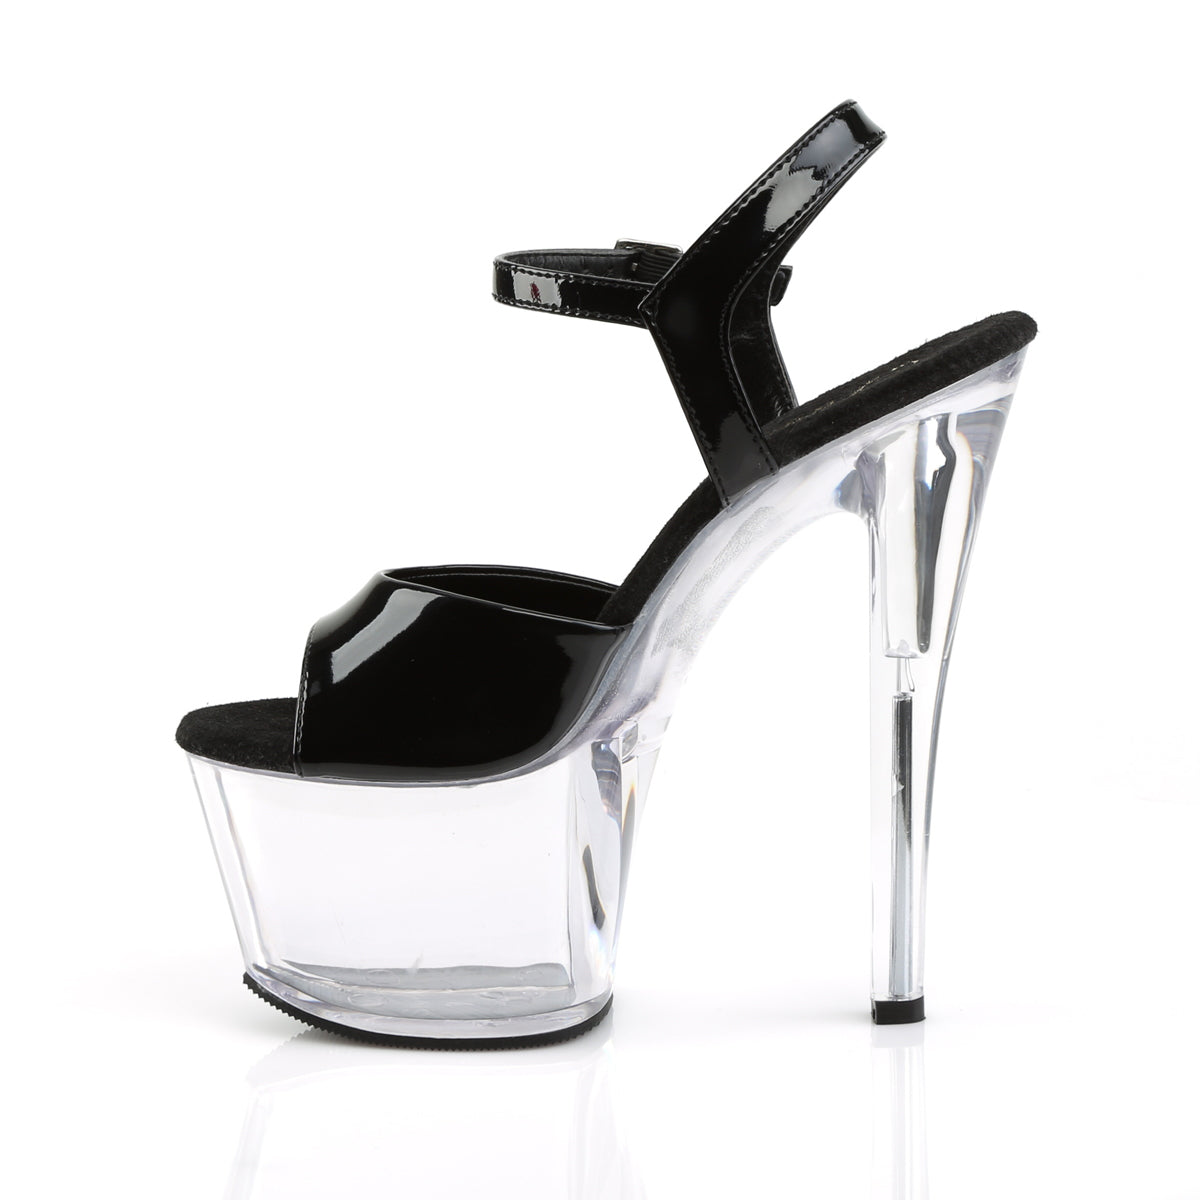 SKY-309 7" Heel Black and Clear Pole Dancing Platforms-Pleaser- Sexy Shoes Pole Dance Heels